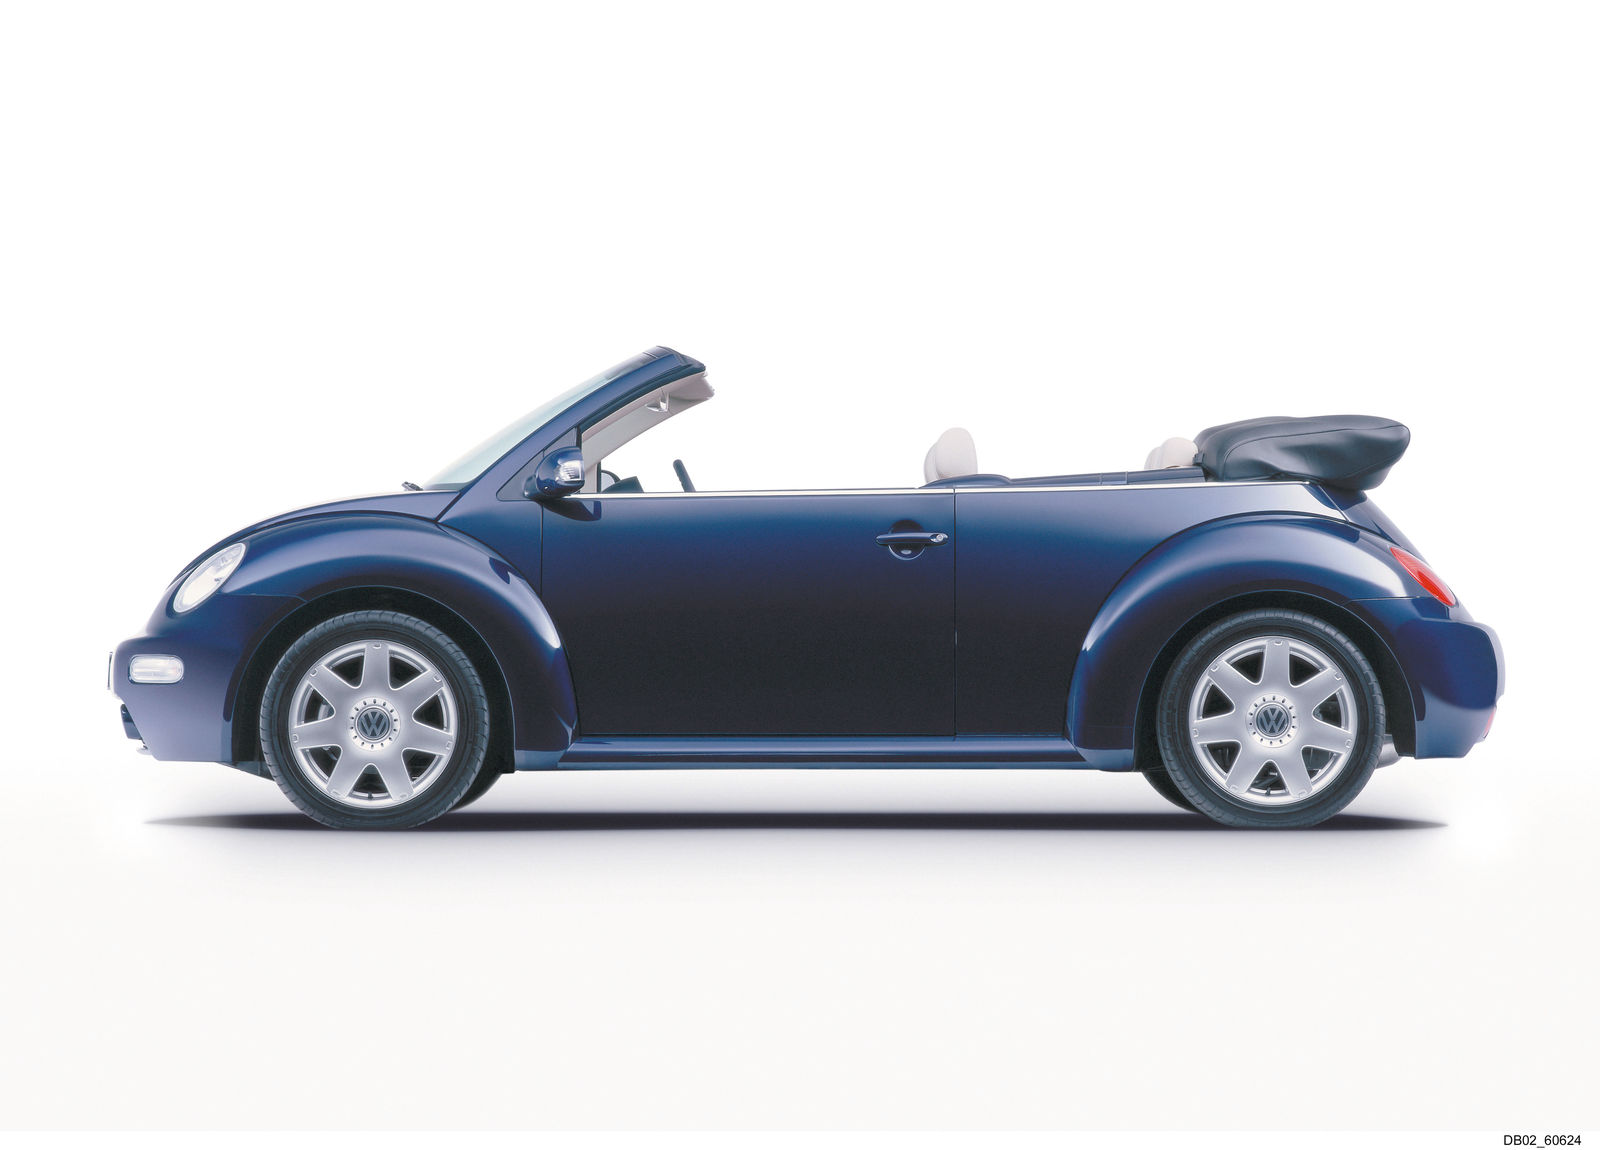 New Beetle Cabriolet